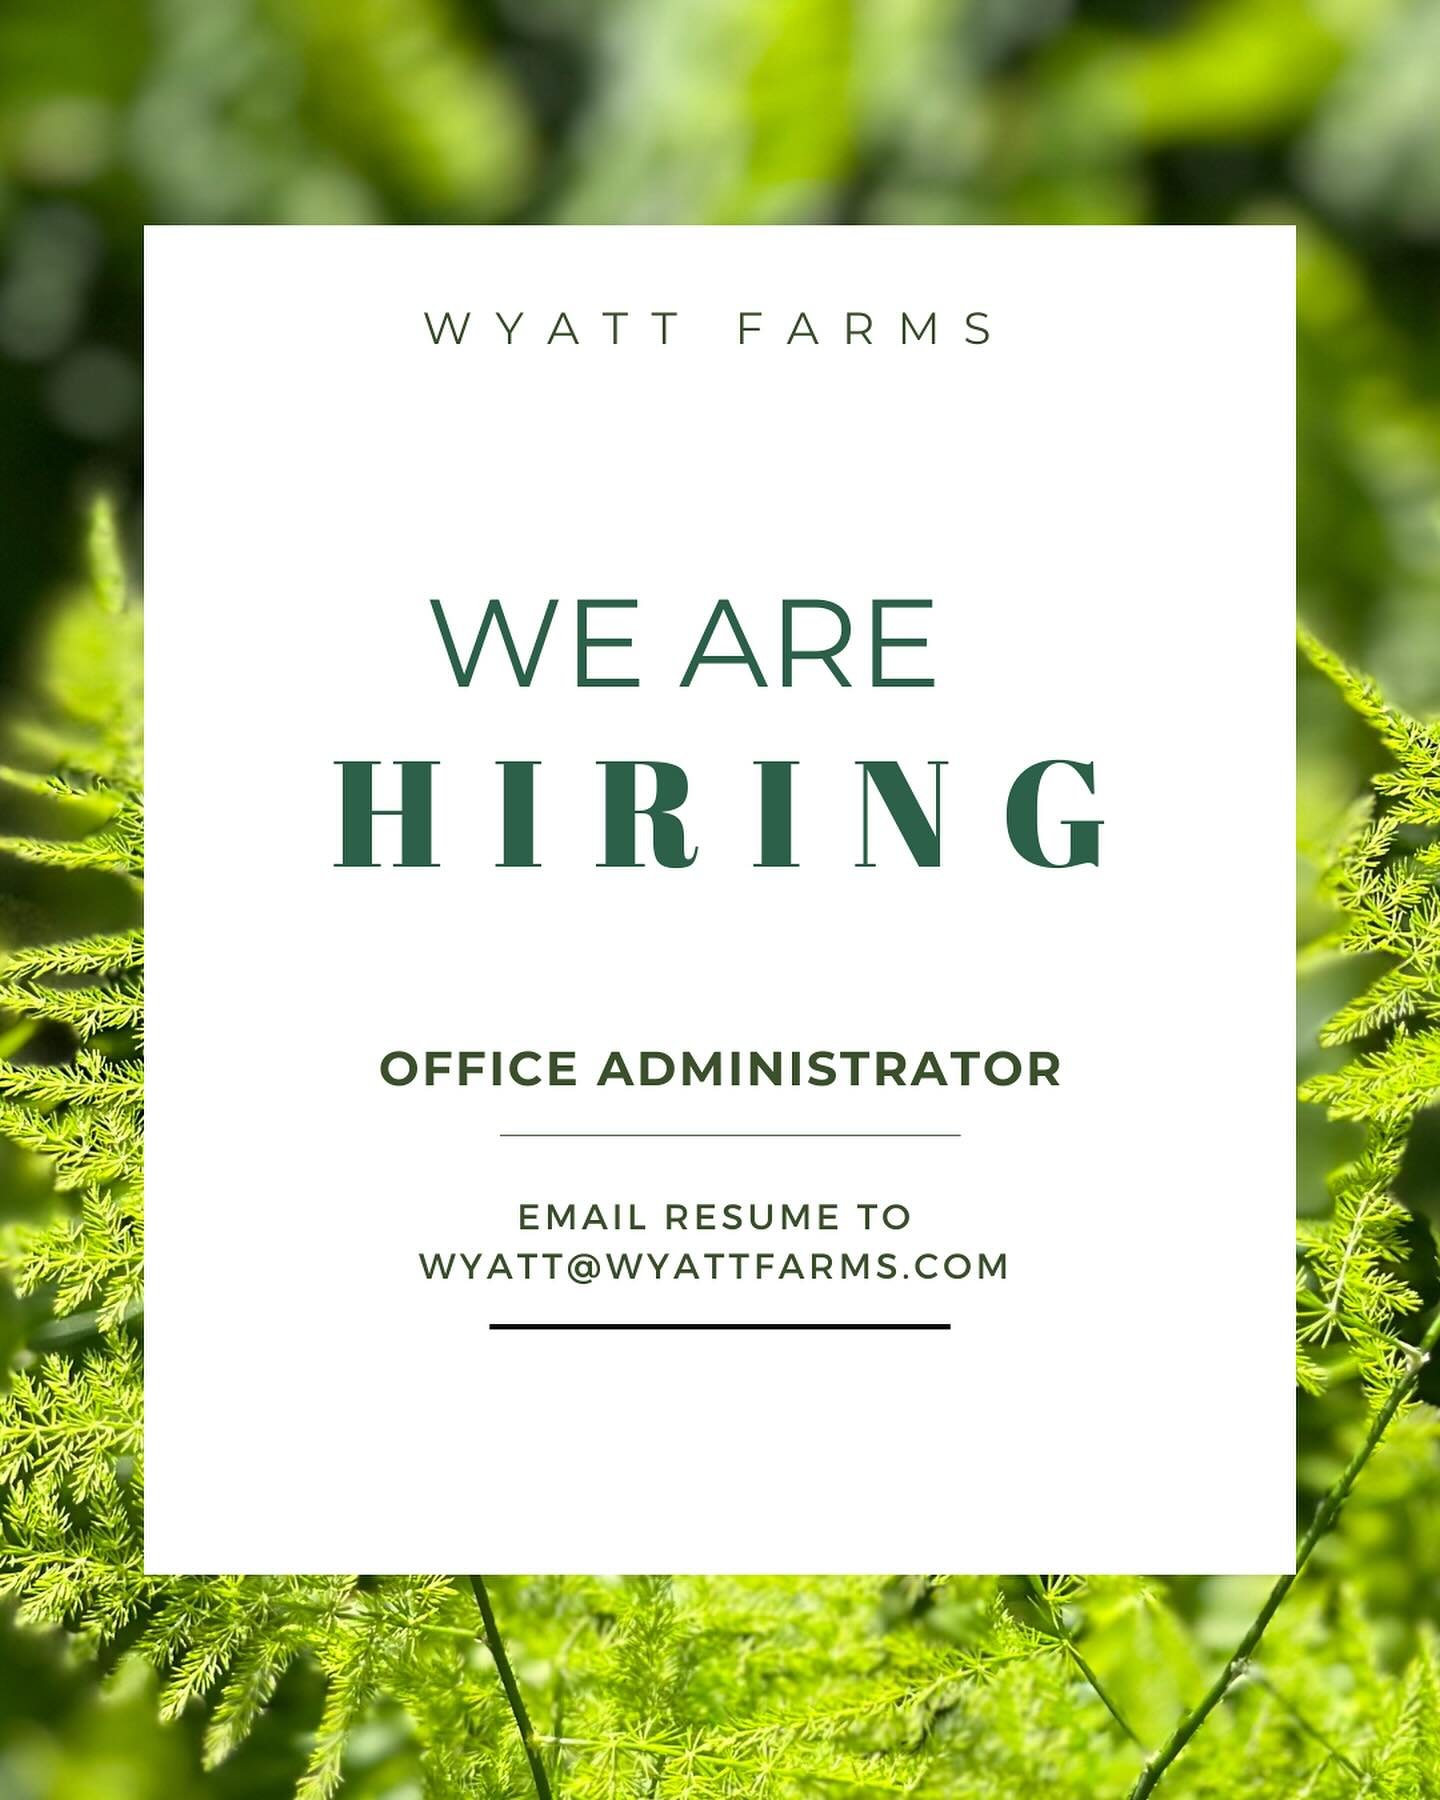 Come join our team!  It&rsquo;s a beautiful place to work! Email your resume to wyatt@wyattfarms.com 🌿